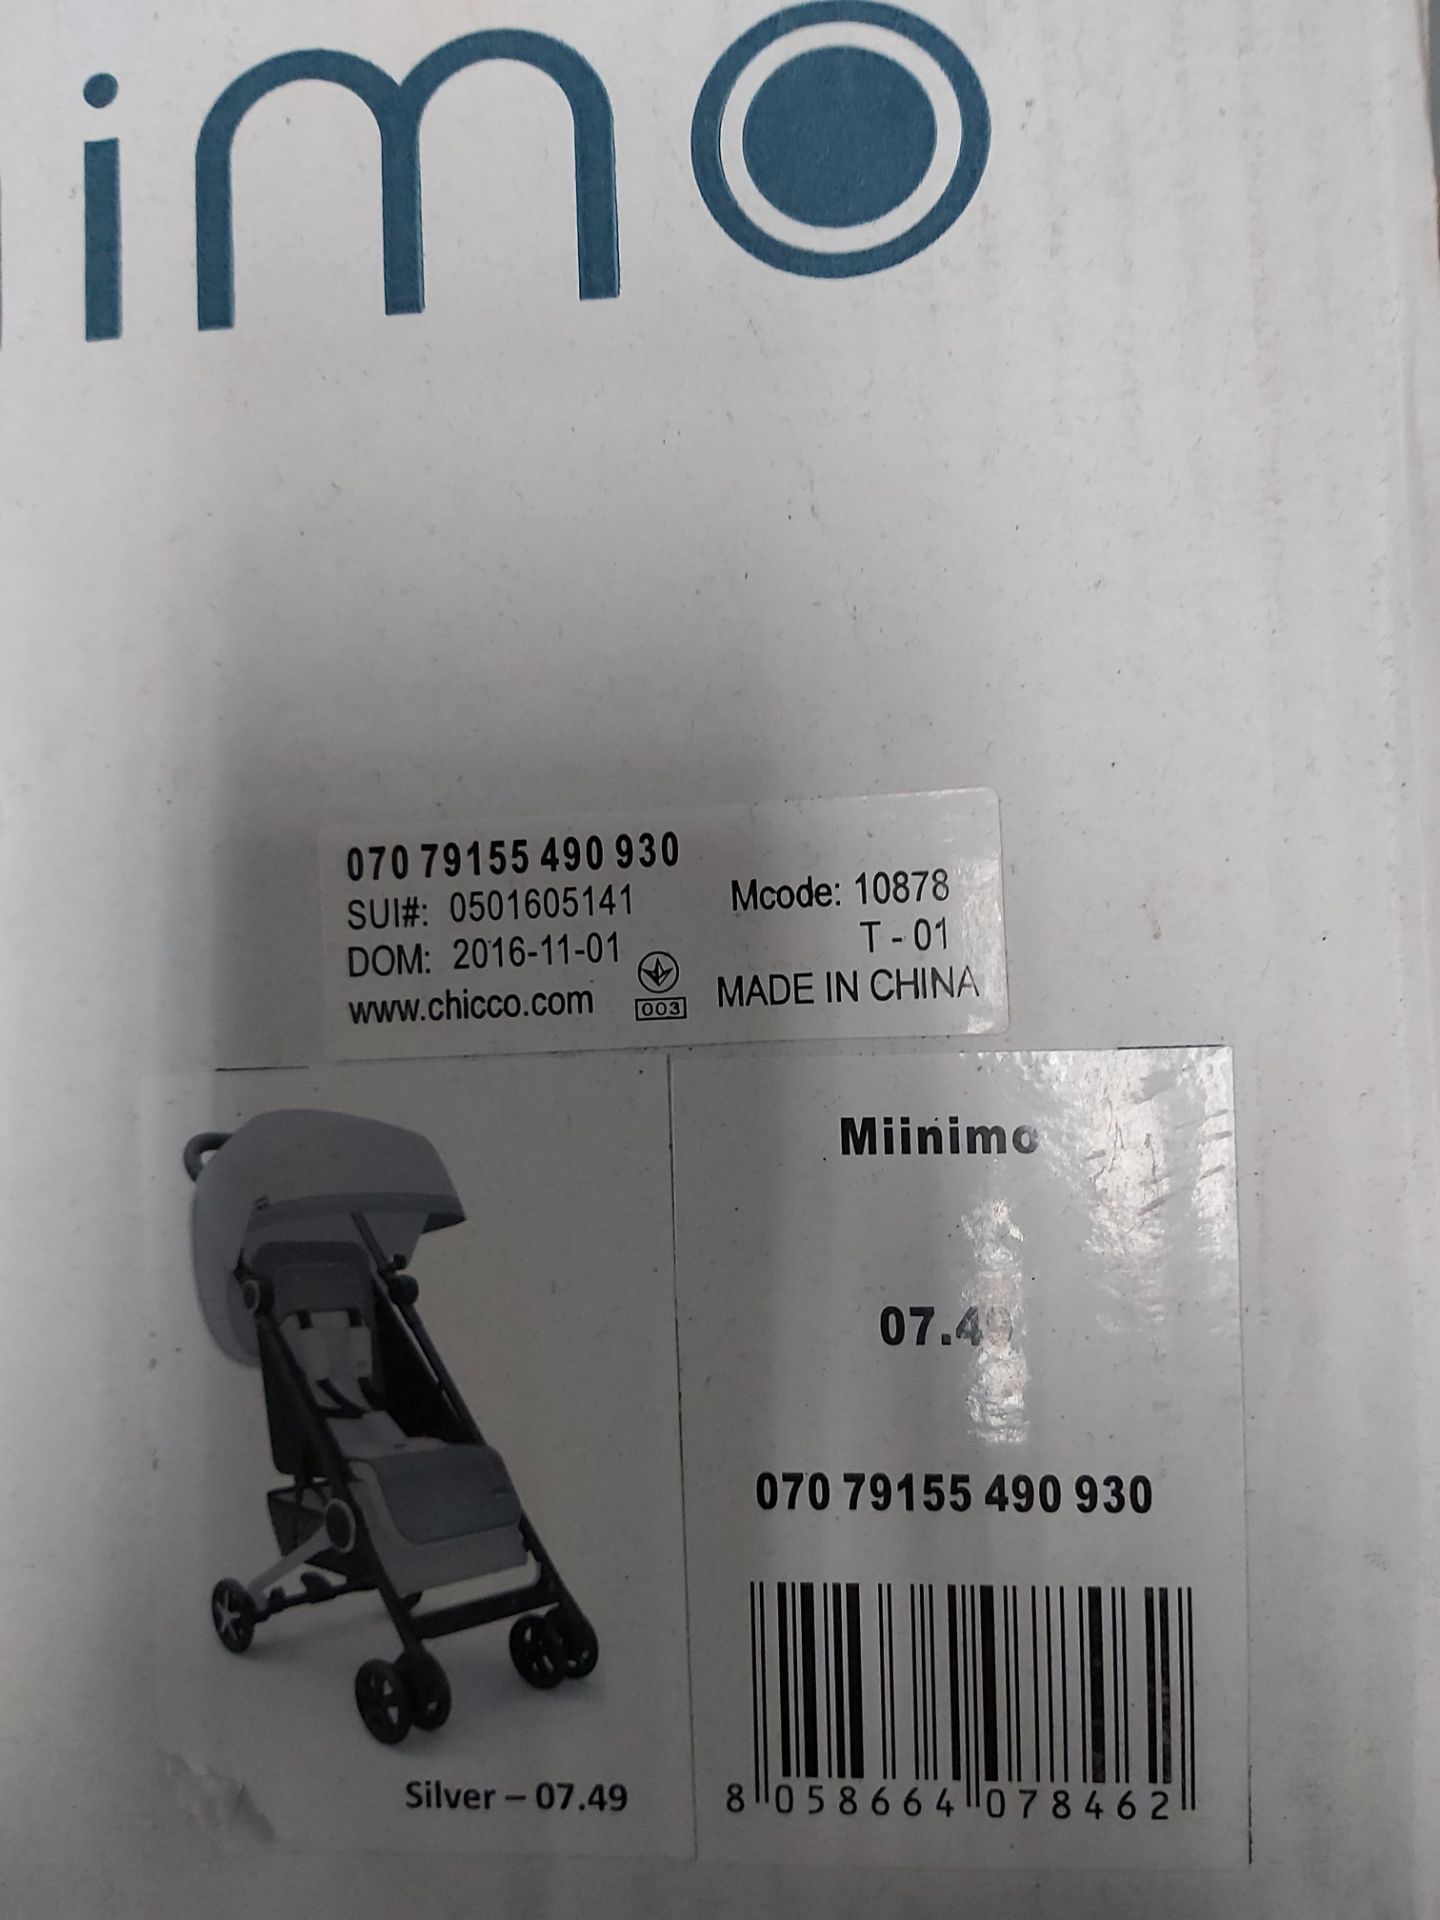 5 x Chicco Miinimo Silver/Grey Folding Stroller. Condition New & Sealed. (RRP £550) - Image 2 of 4